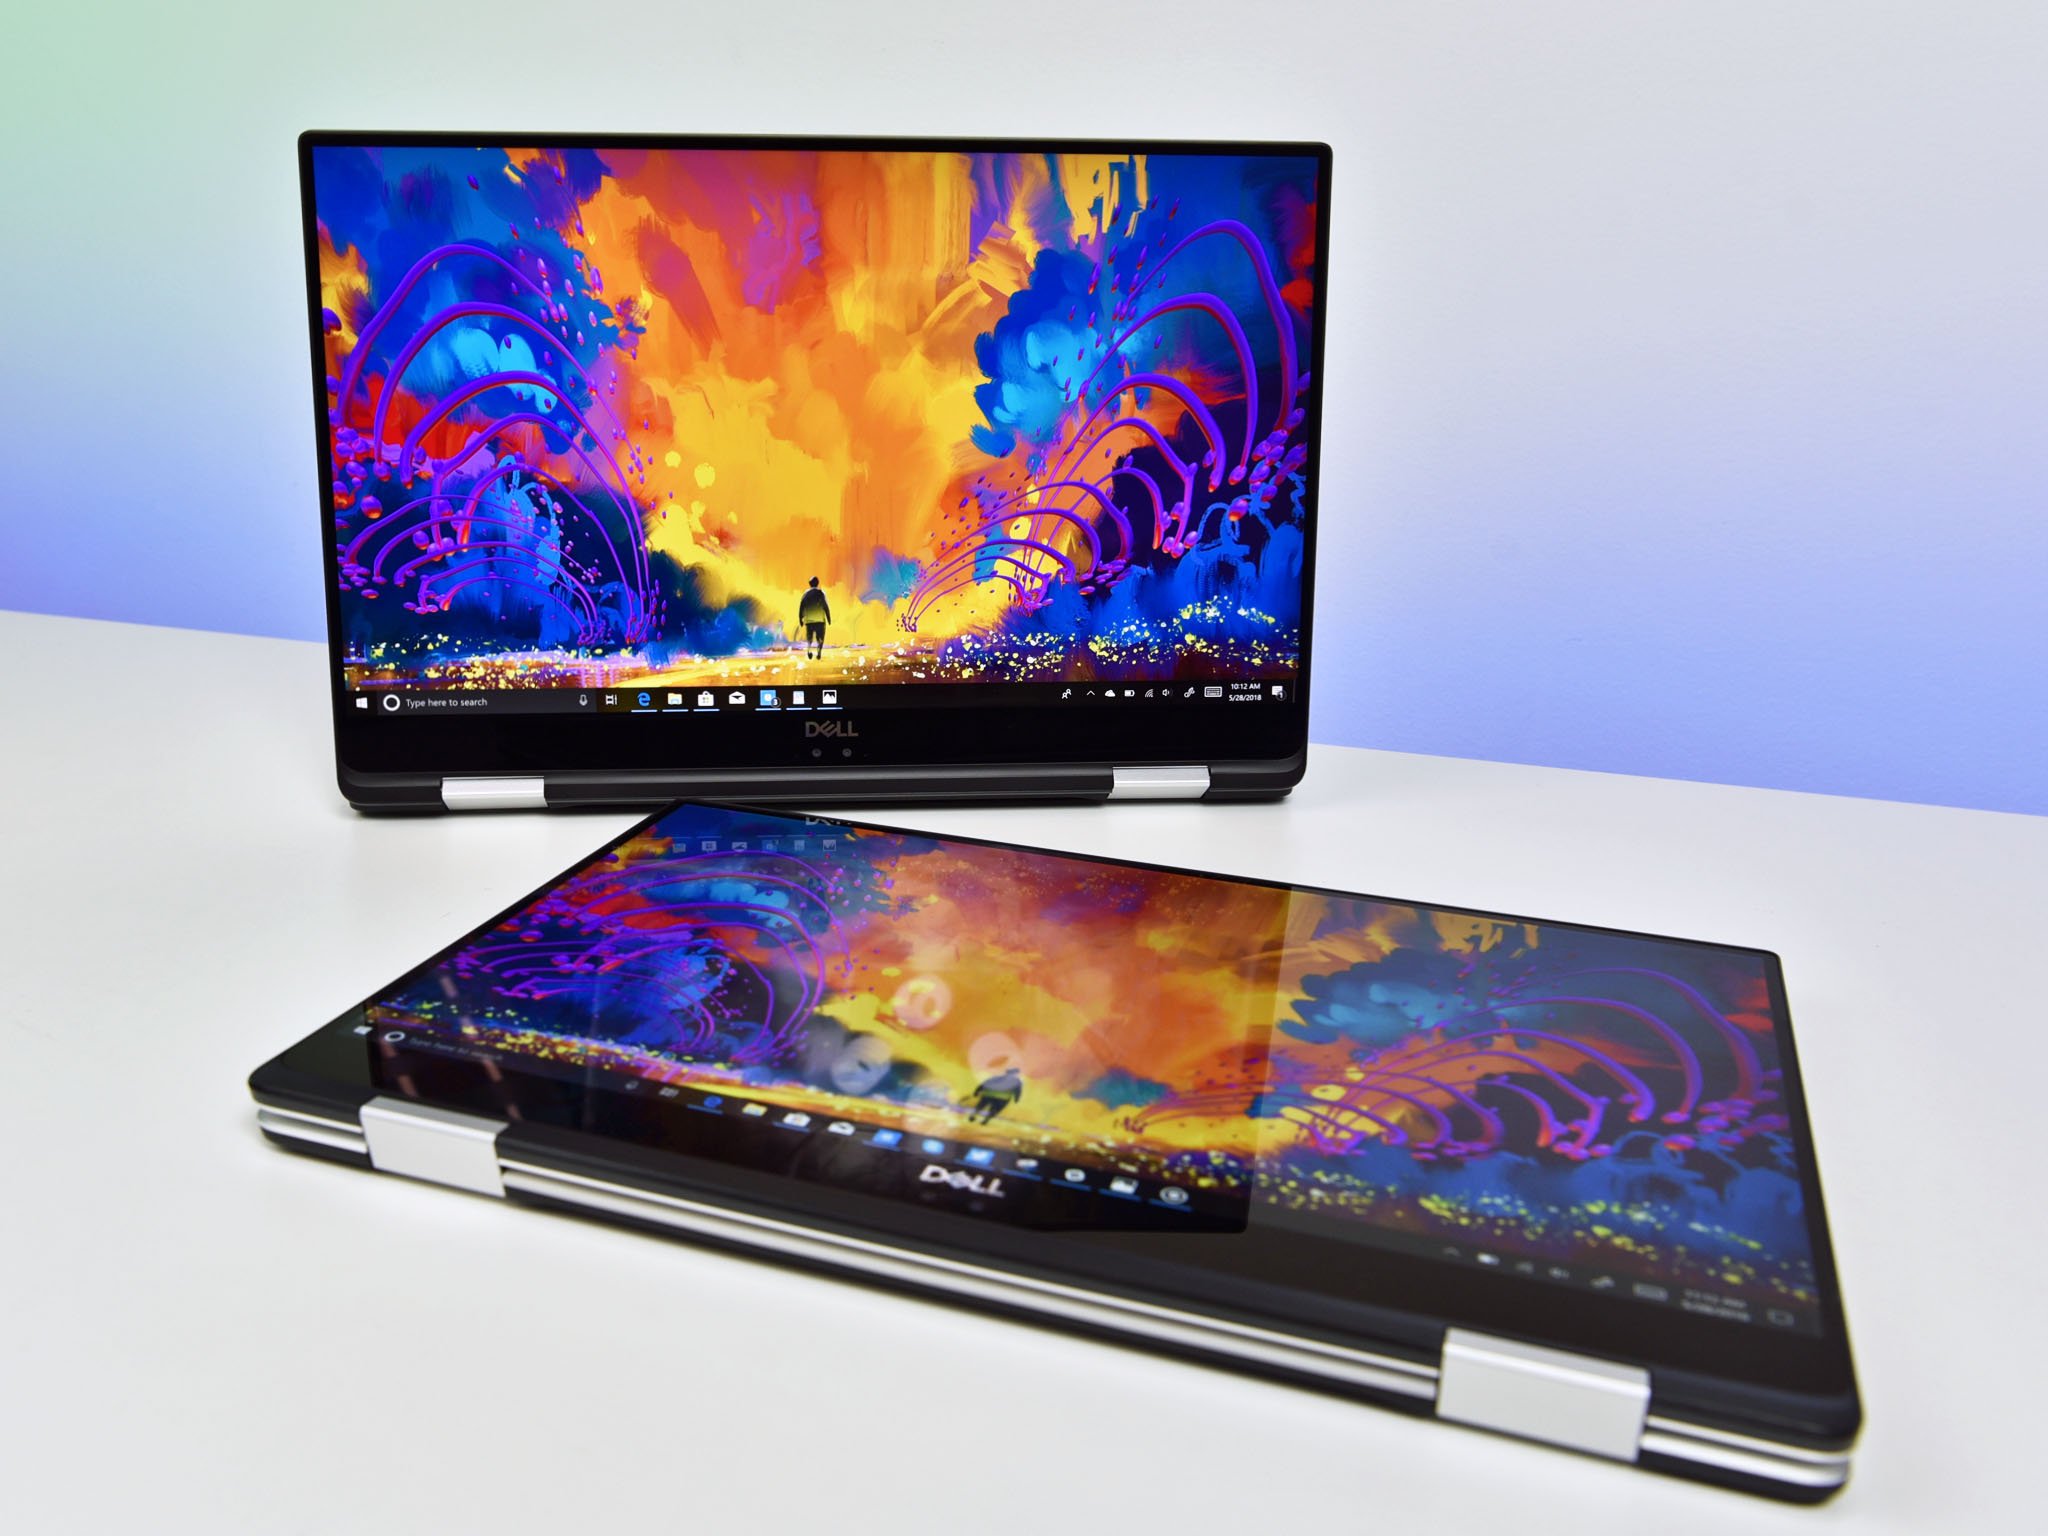 Our Dell XPS 15 2-in-1 (9575) video review shows this powerhouse